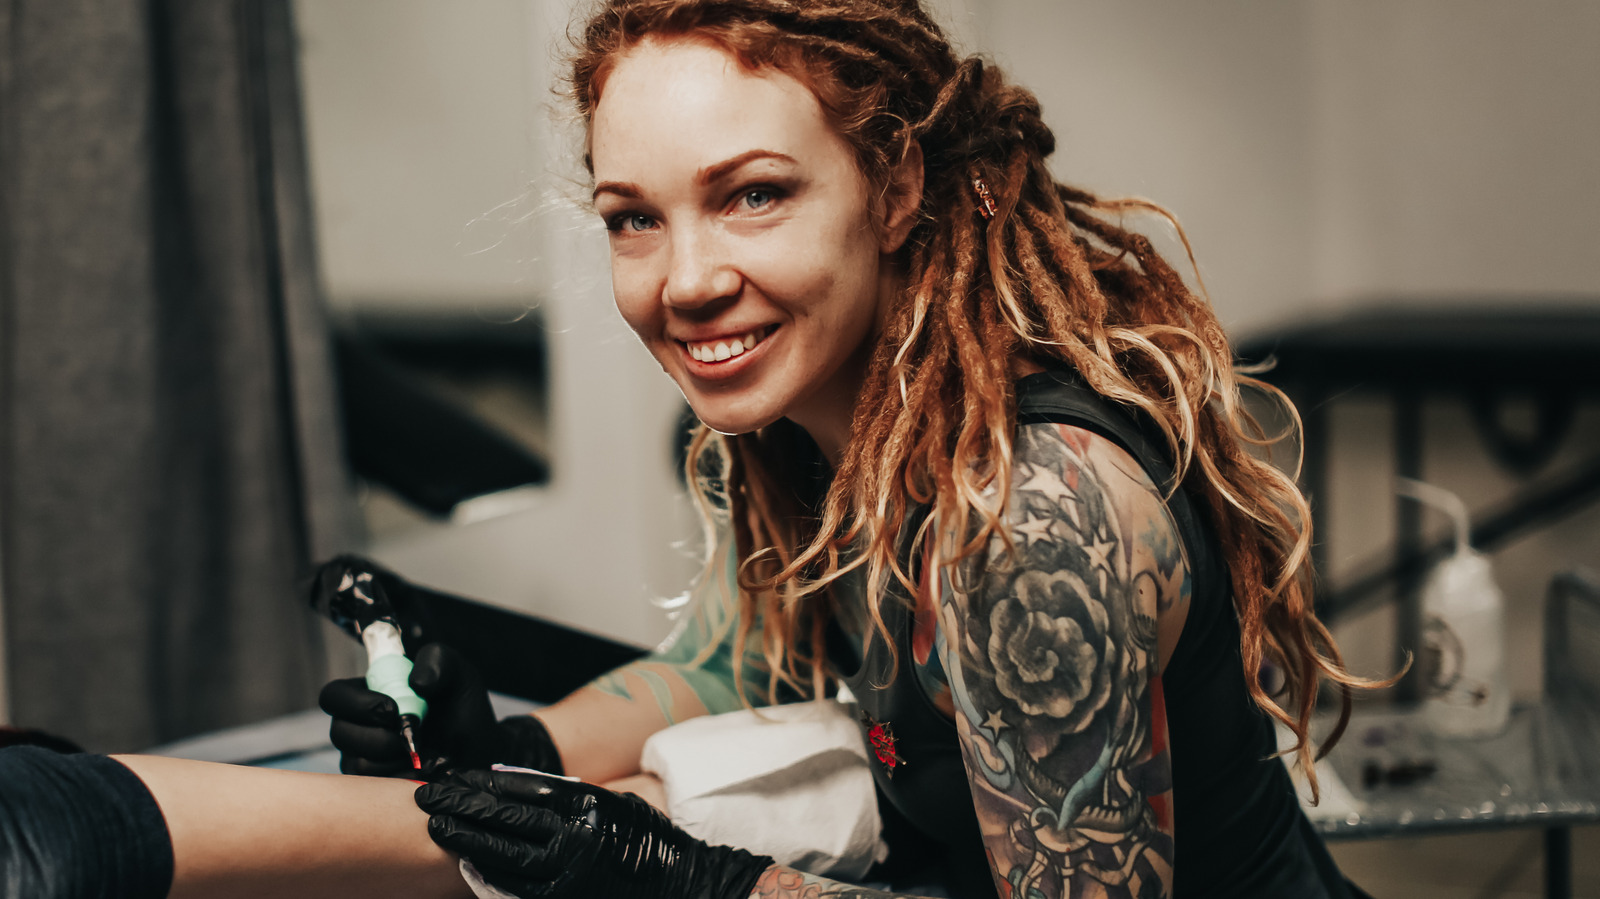 Tattoo Shop Etiquette Your First Visit to San Diego Tattoo Company